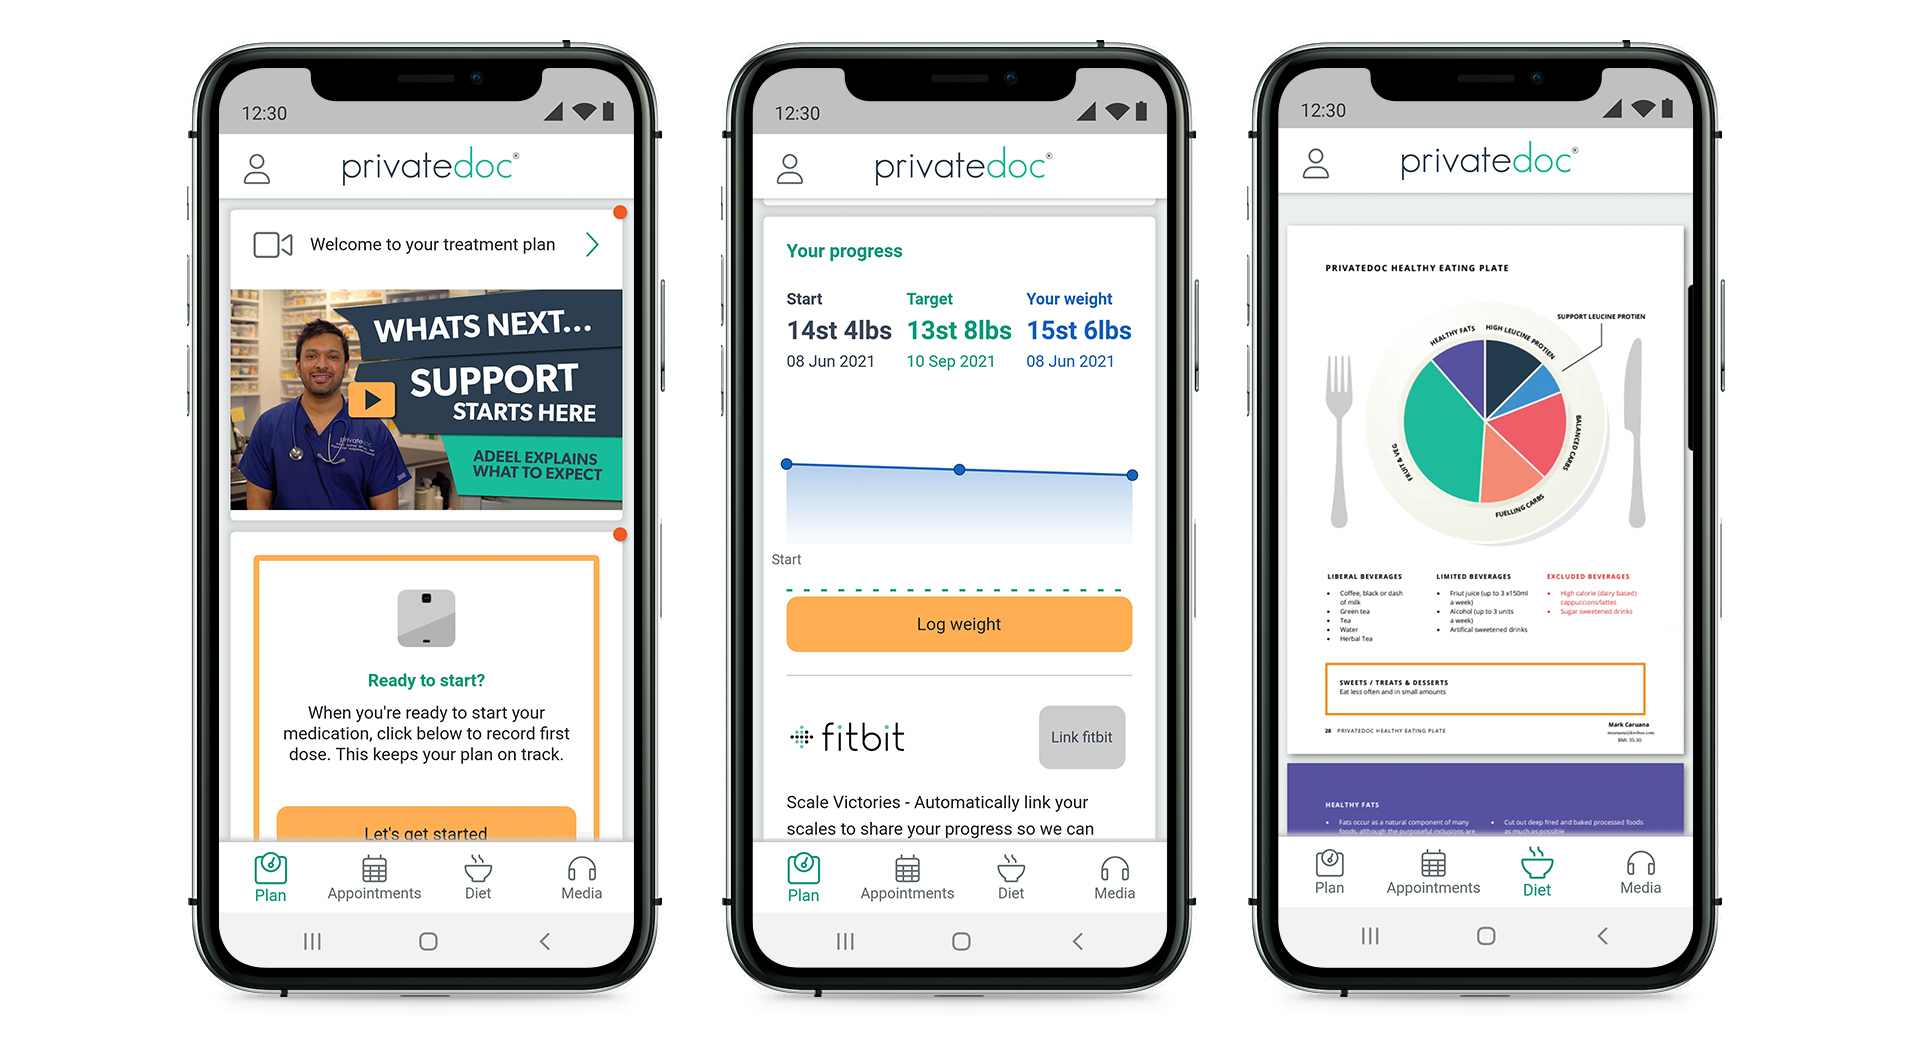 PrivateDoc Tackle Obesity With The Launch Of The First-Of-Its-Kind Weight Loss Treatment Tracking App